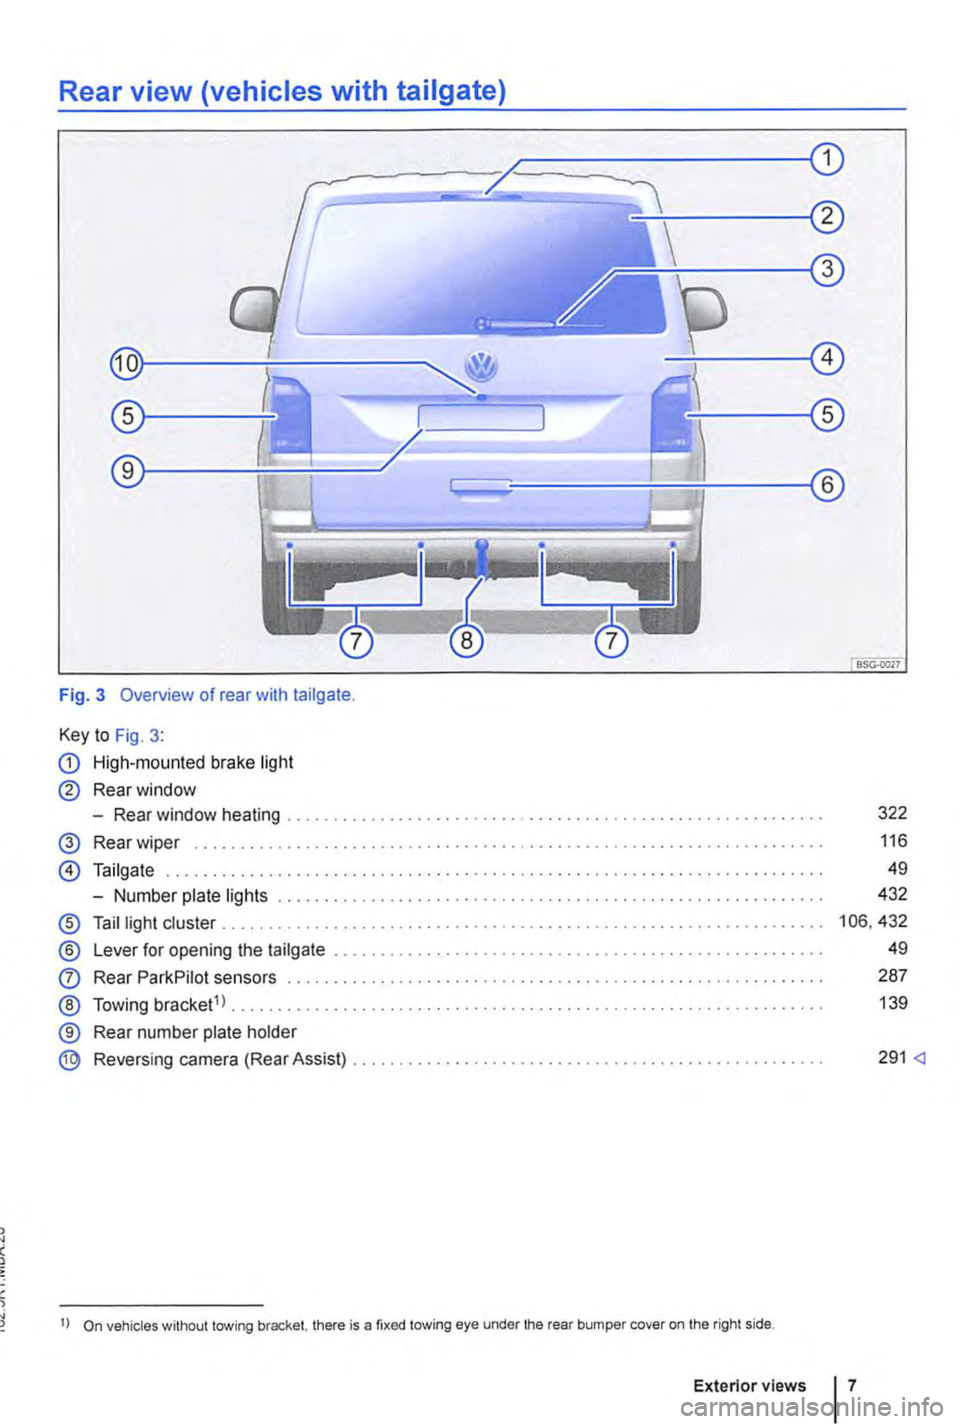 VOLKSWAGEN TRANSPORTER 2013  Owners Manual Rear view (vehicles with tailgate) 
Fig. 3 Overview of rear with tailgate. 
Key to Fig. 3: 
CD High-mounted brake light 
@ Rear window 
-Rear window heating ........................ . 
@ Rear wiper ..